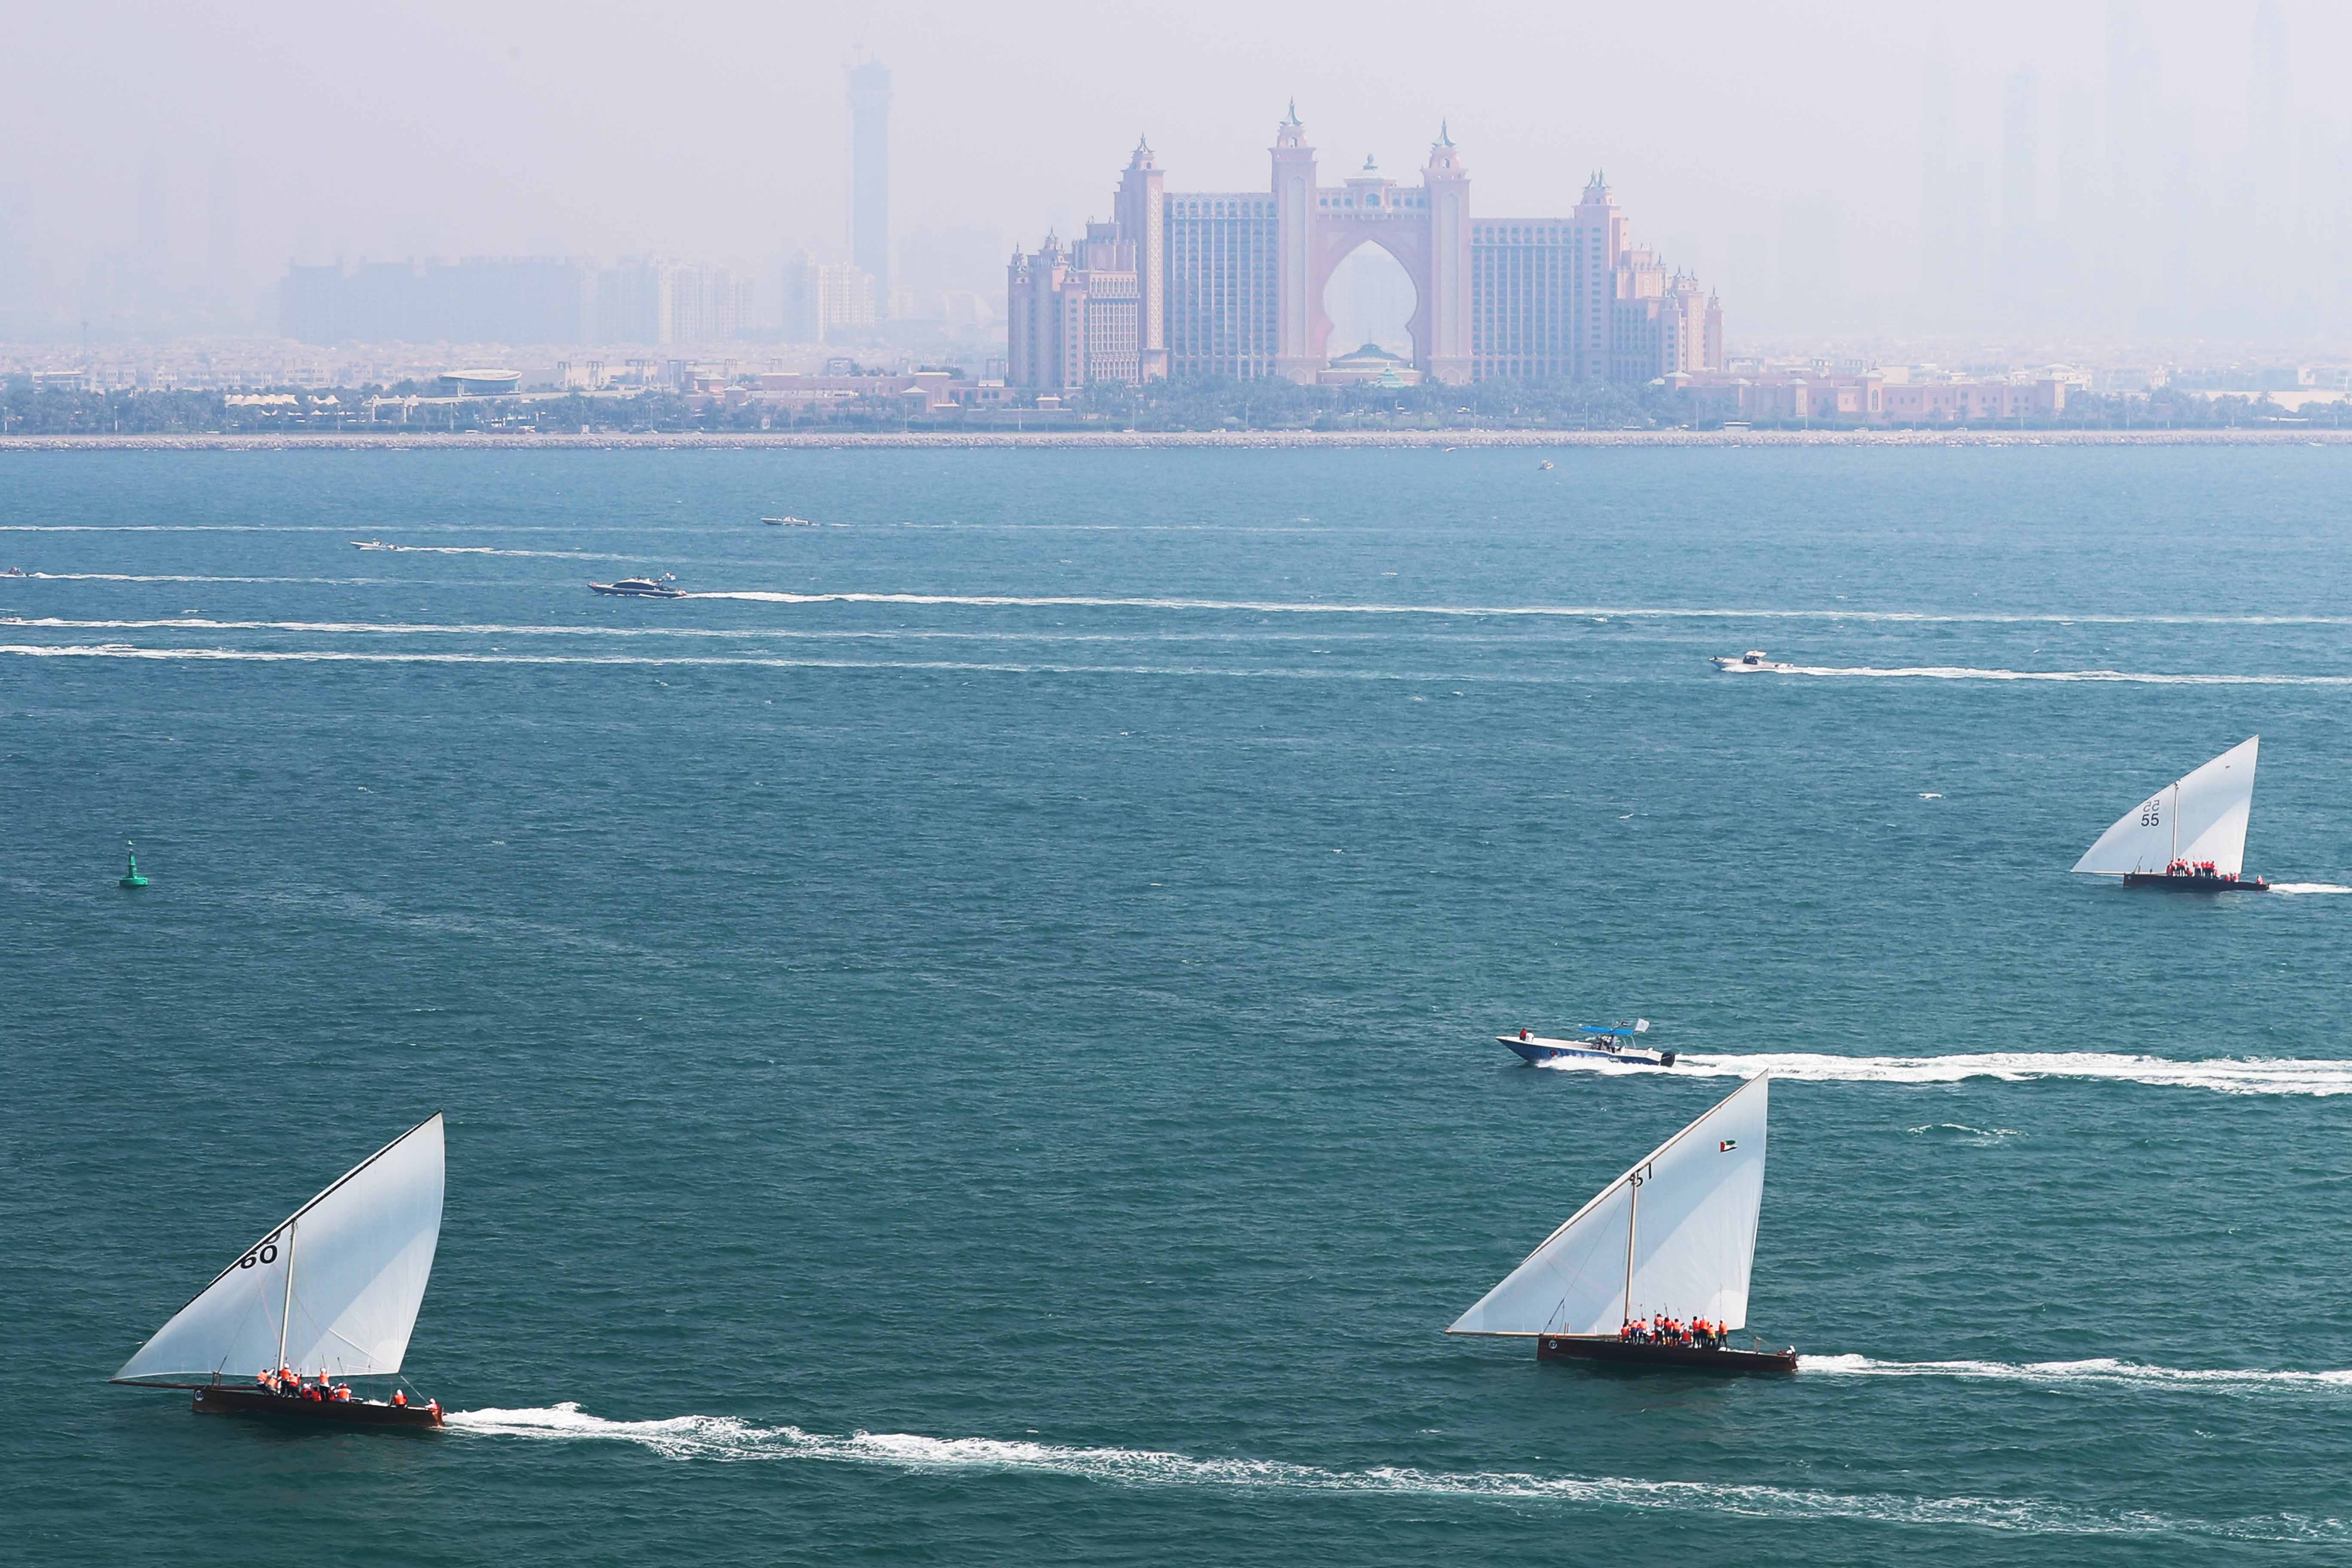 Registration for 43ft Dhow Race Closes Today